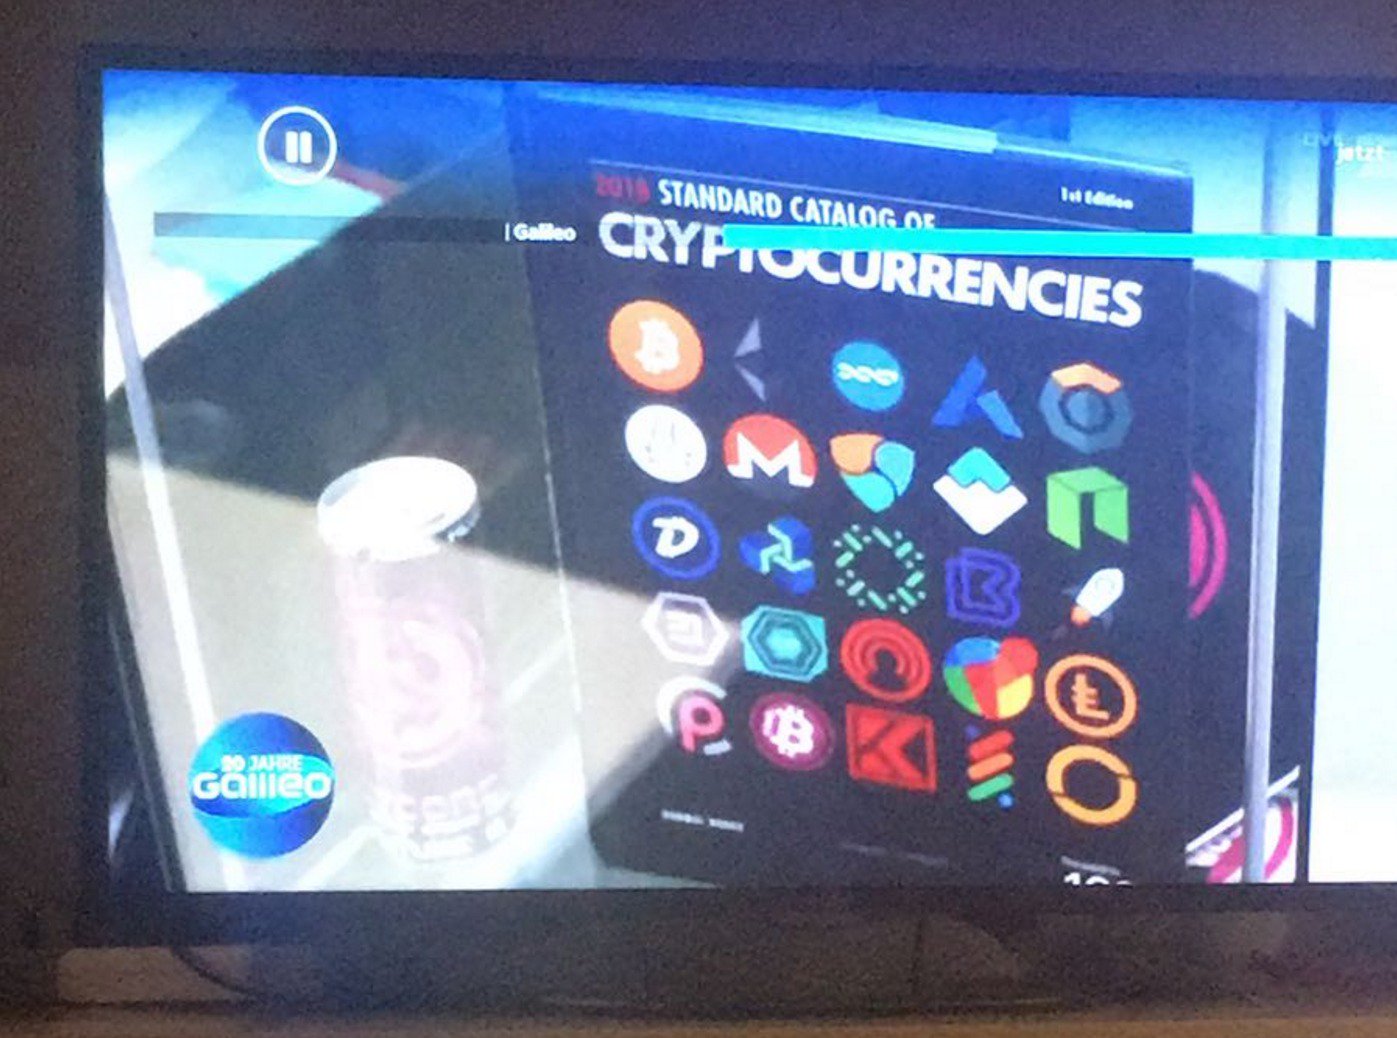 The Cryptocurrencies Catalog is spotted at Galileo on ProSieben TV